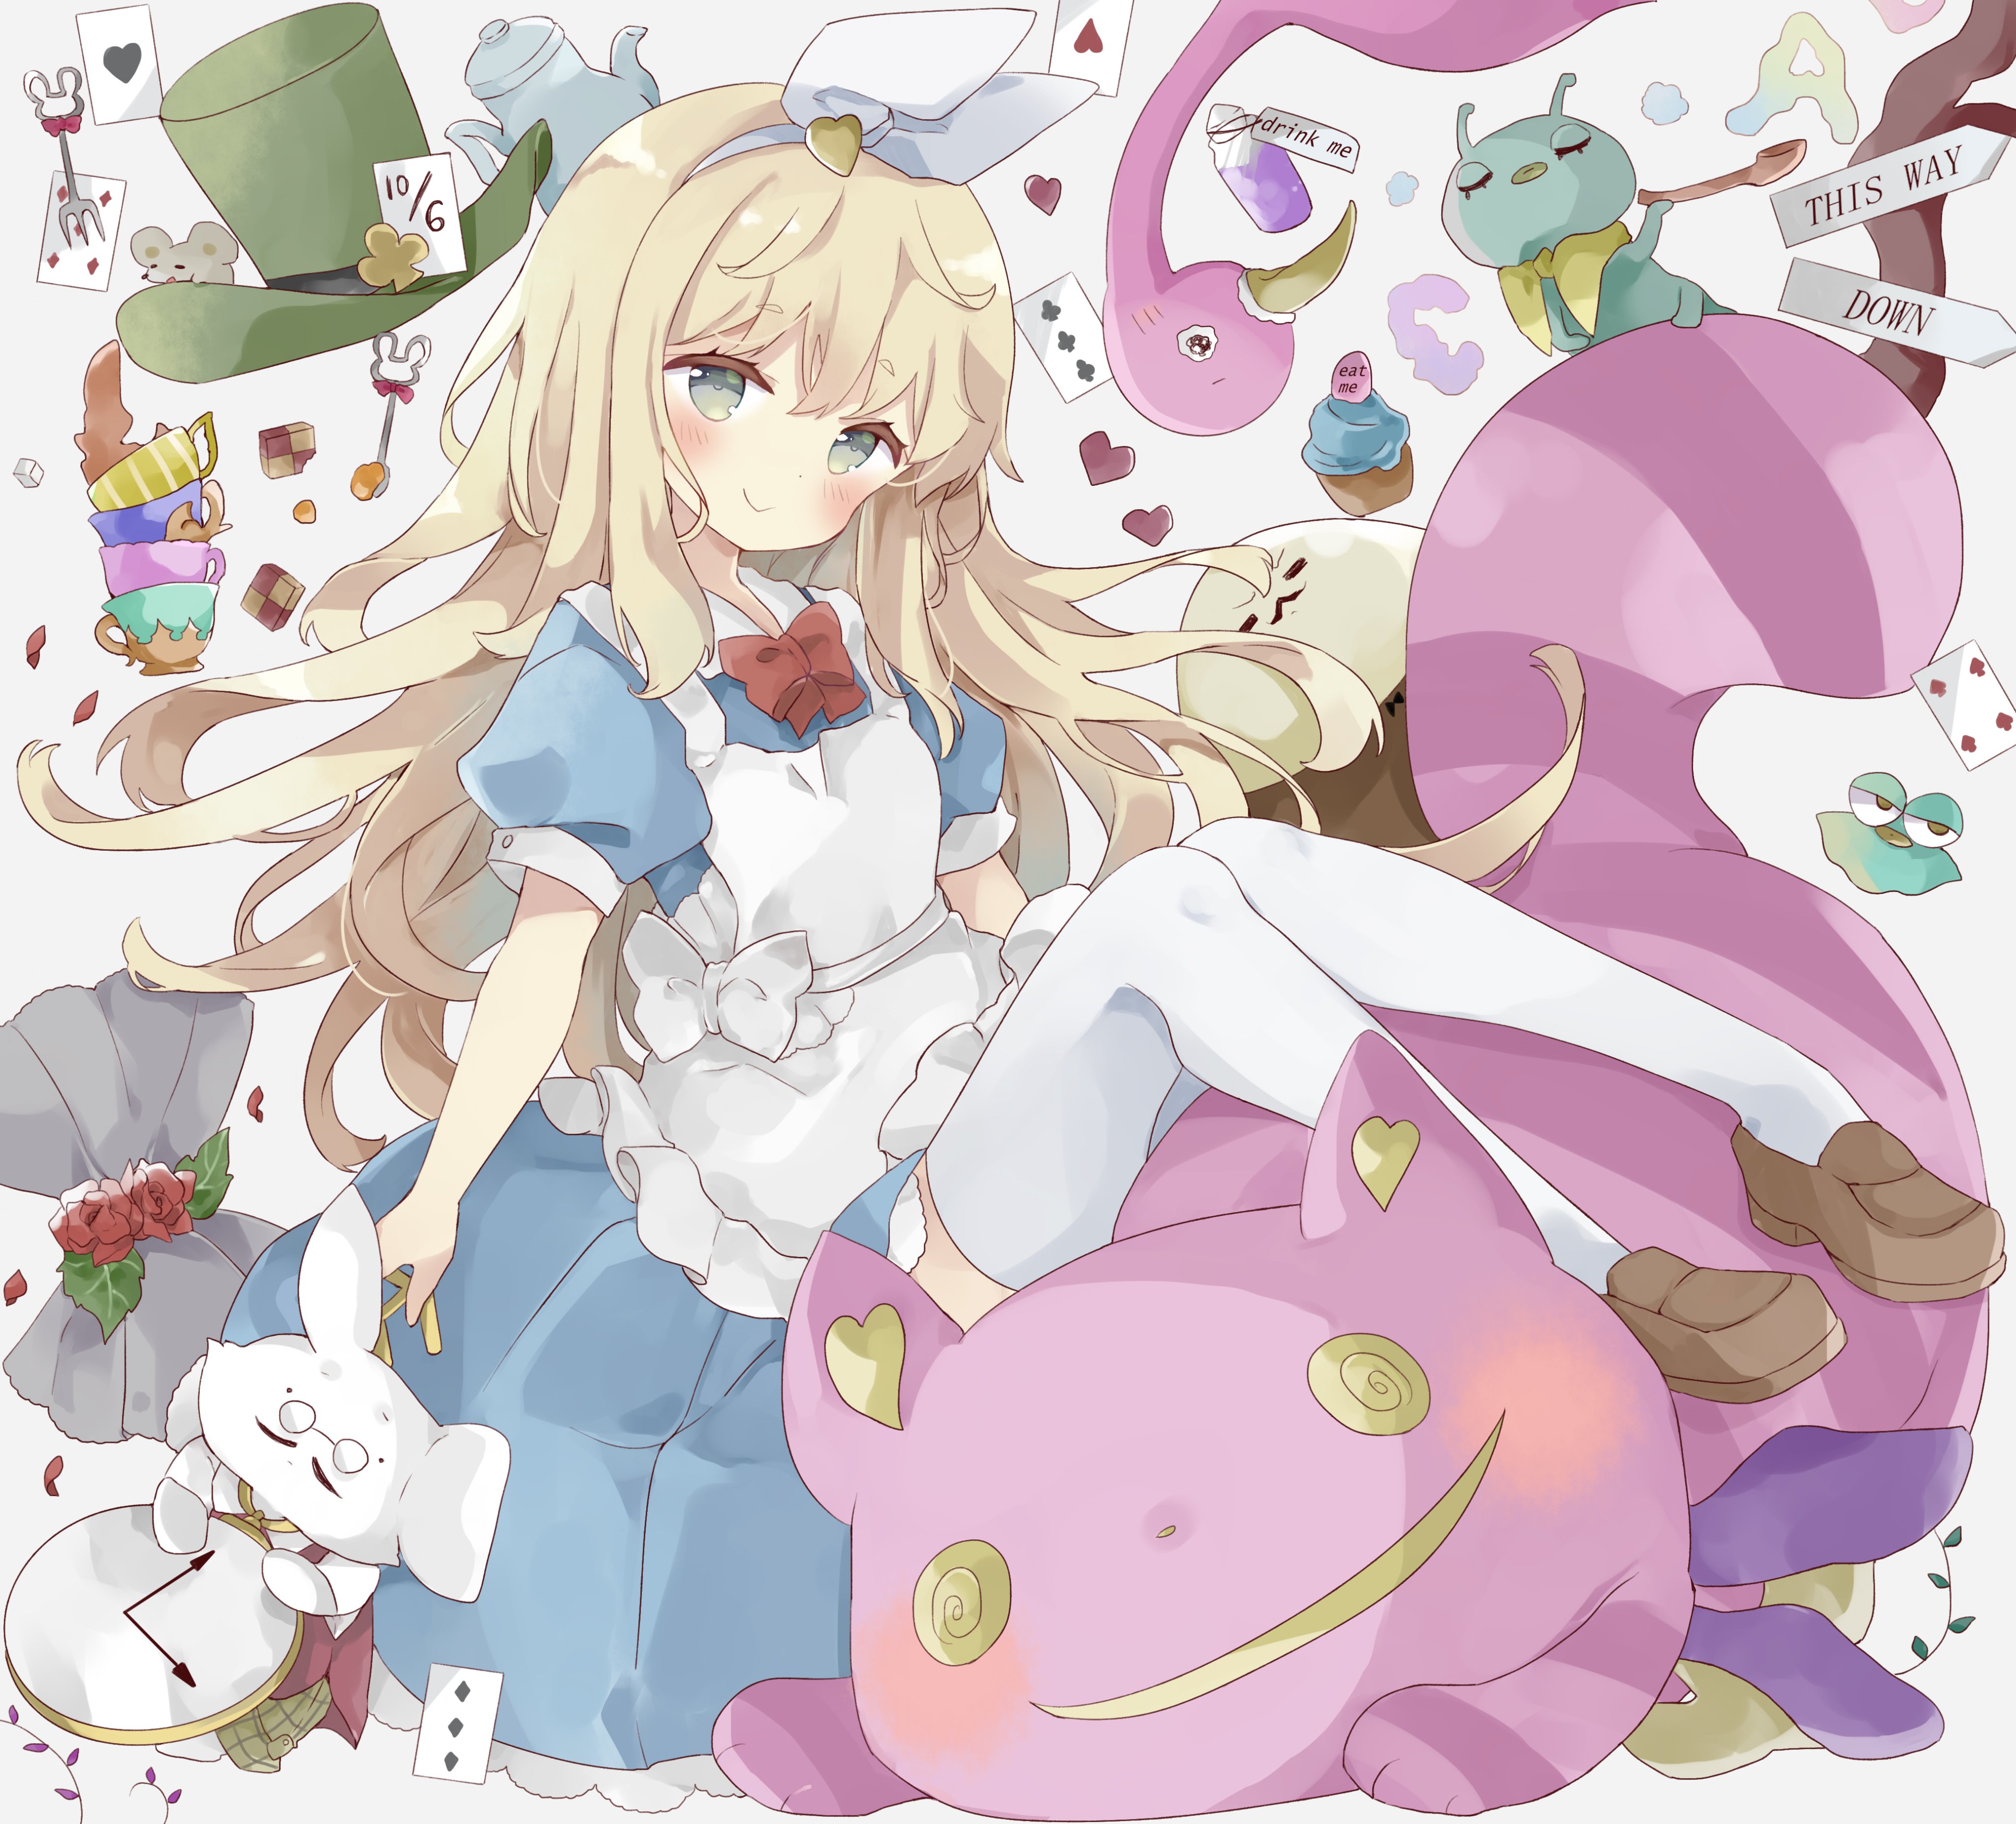 Alices Adventures in Wonderland Anime Manga Pandora Hearts Anime Alices  Adventures in Wonderland Anime png  PNGEgg